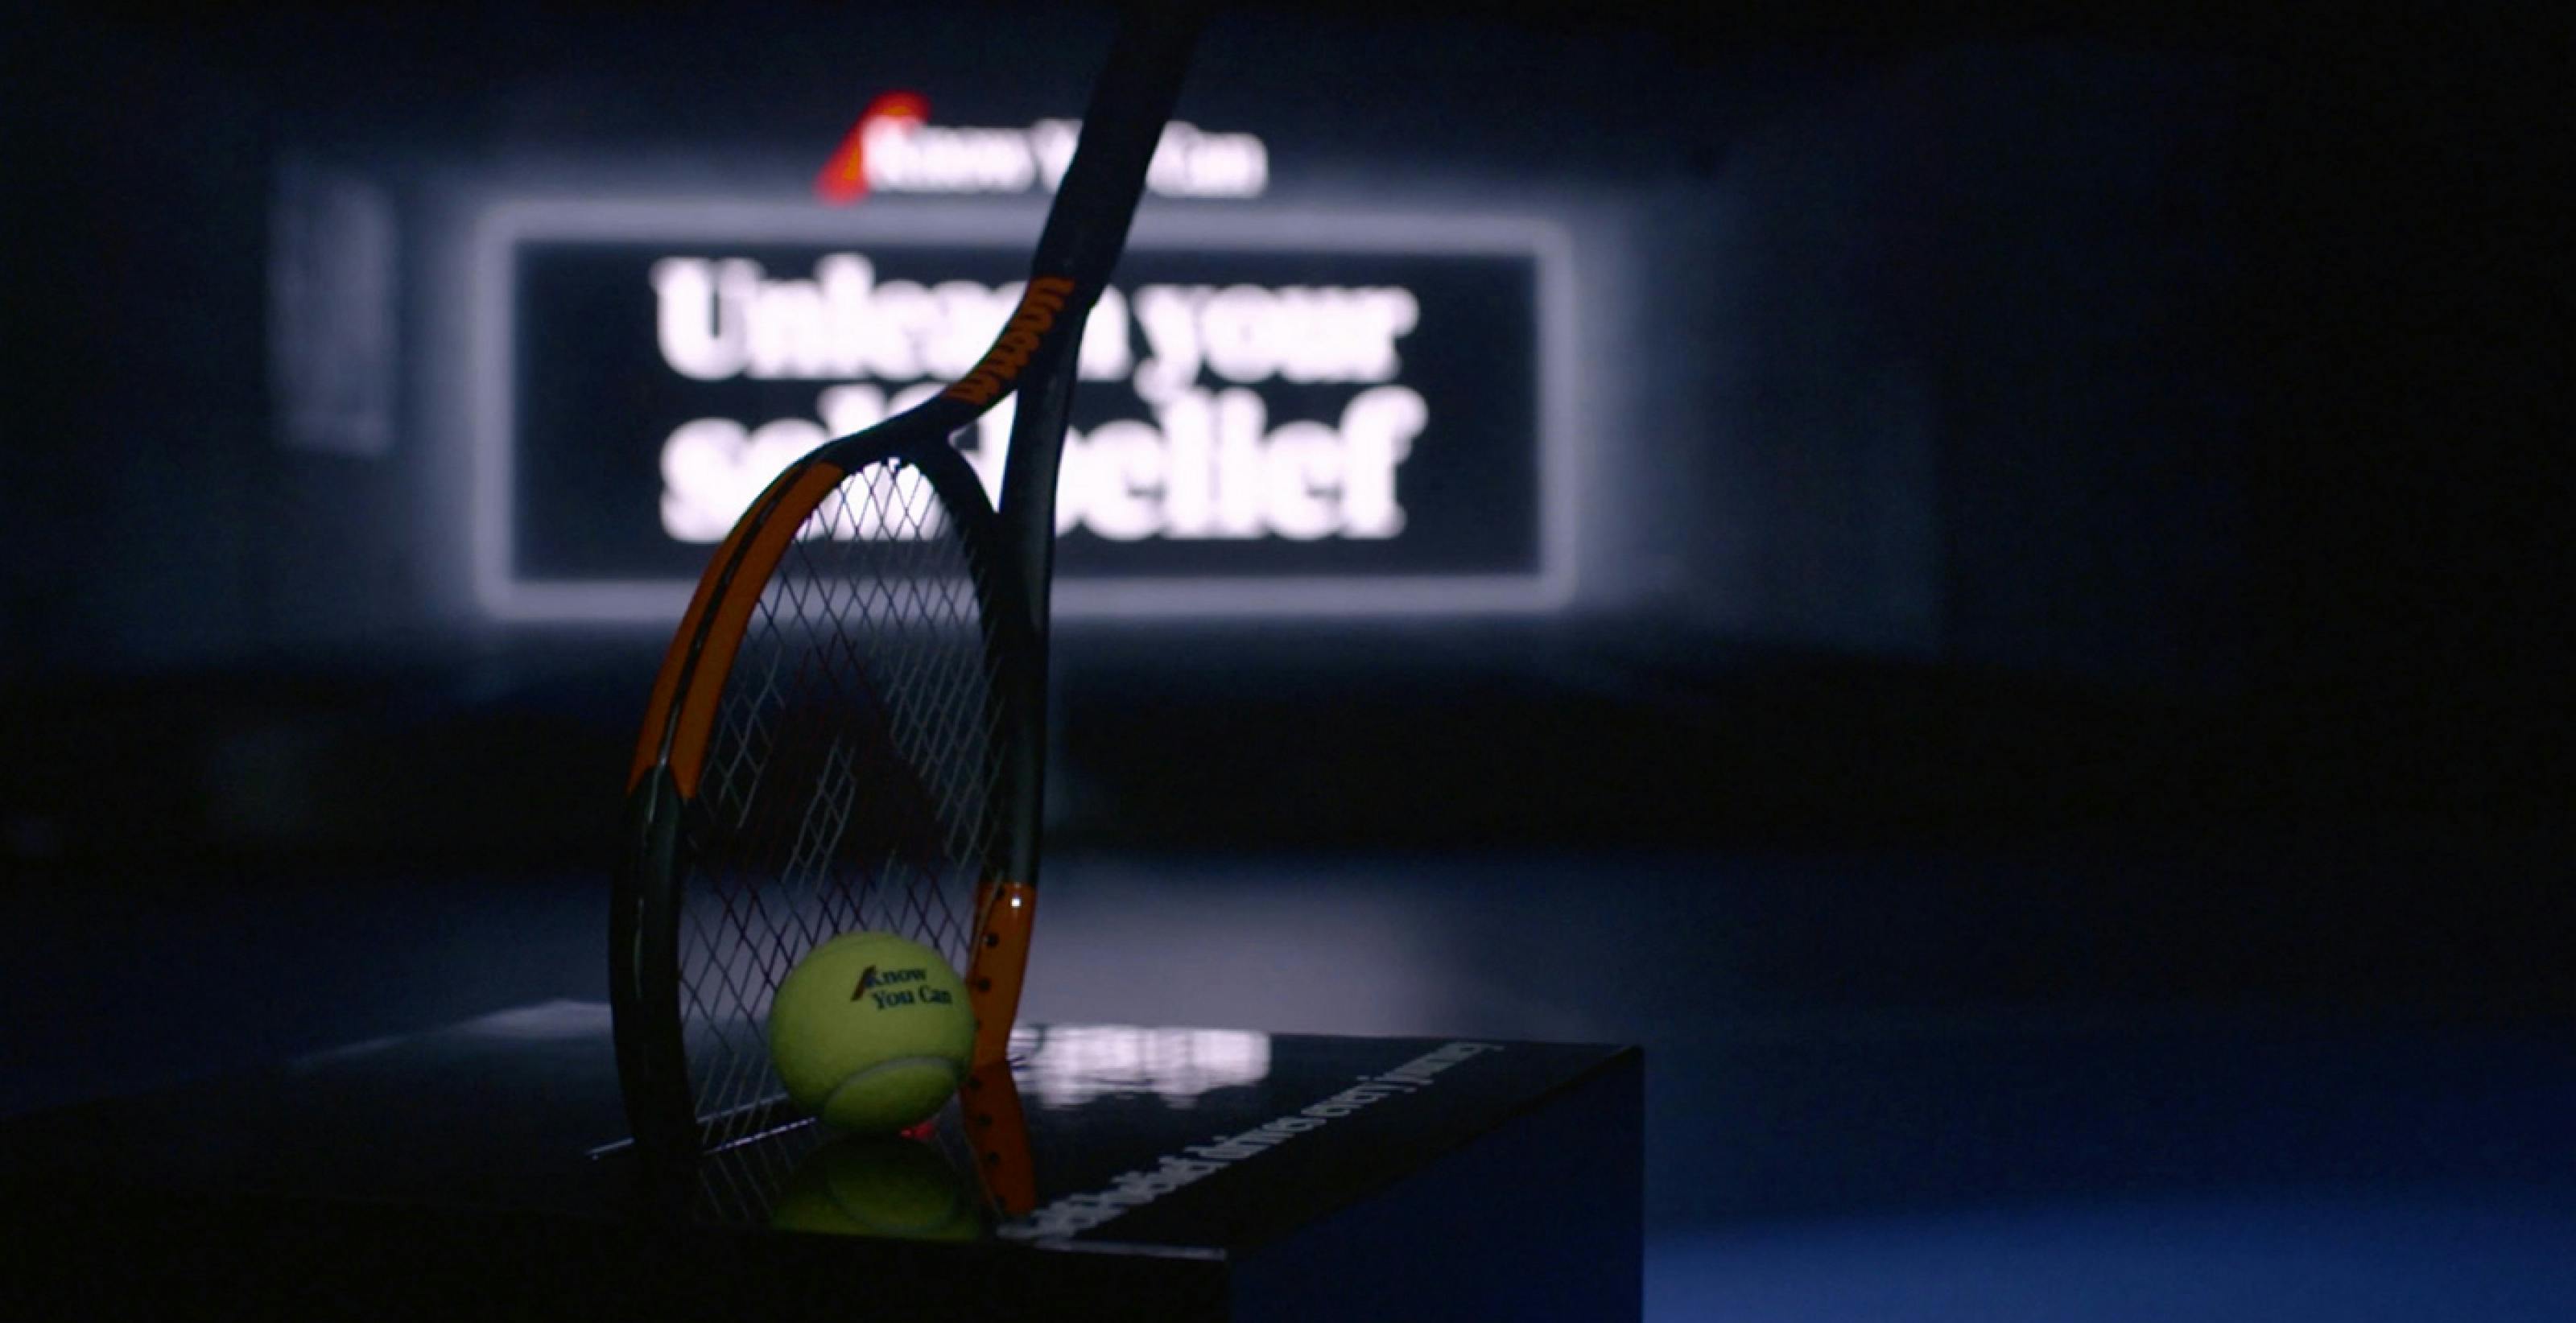 In the foreground, there are a tennis racket and a ball. In the background, the theme of the installation is showed on the screen.